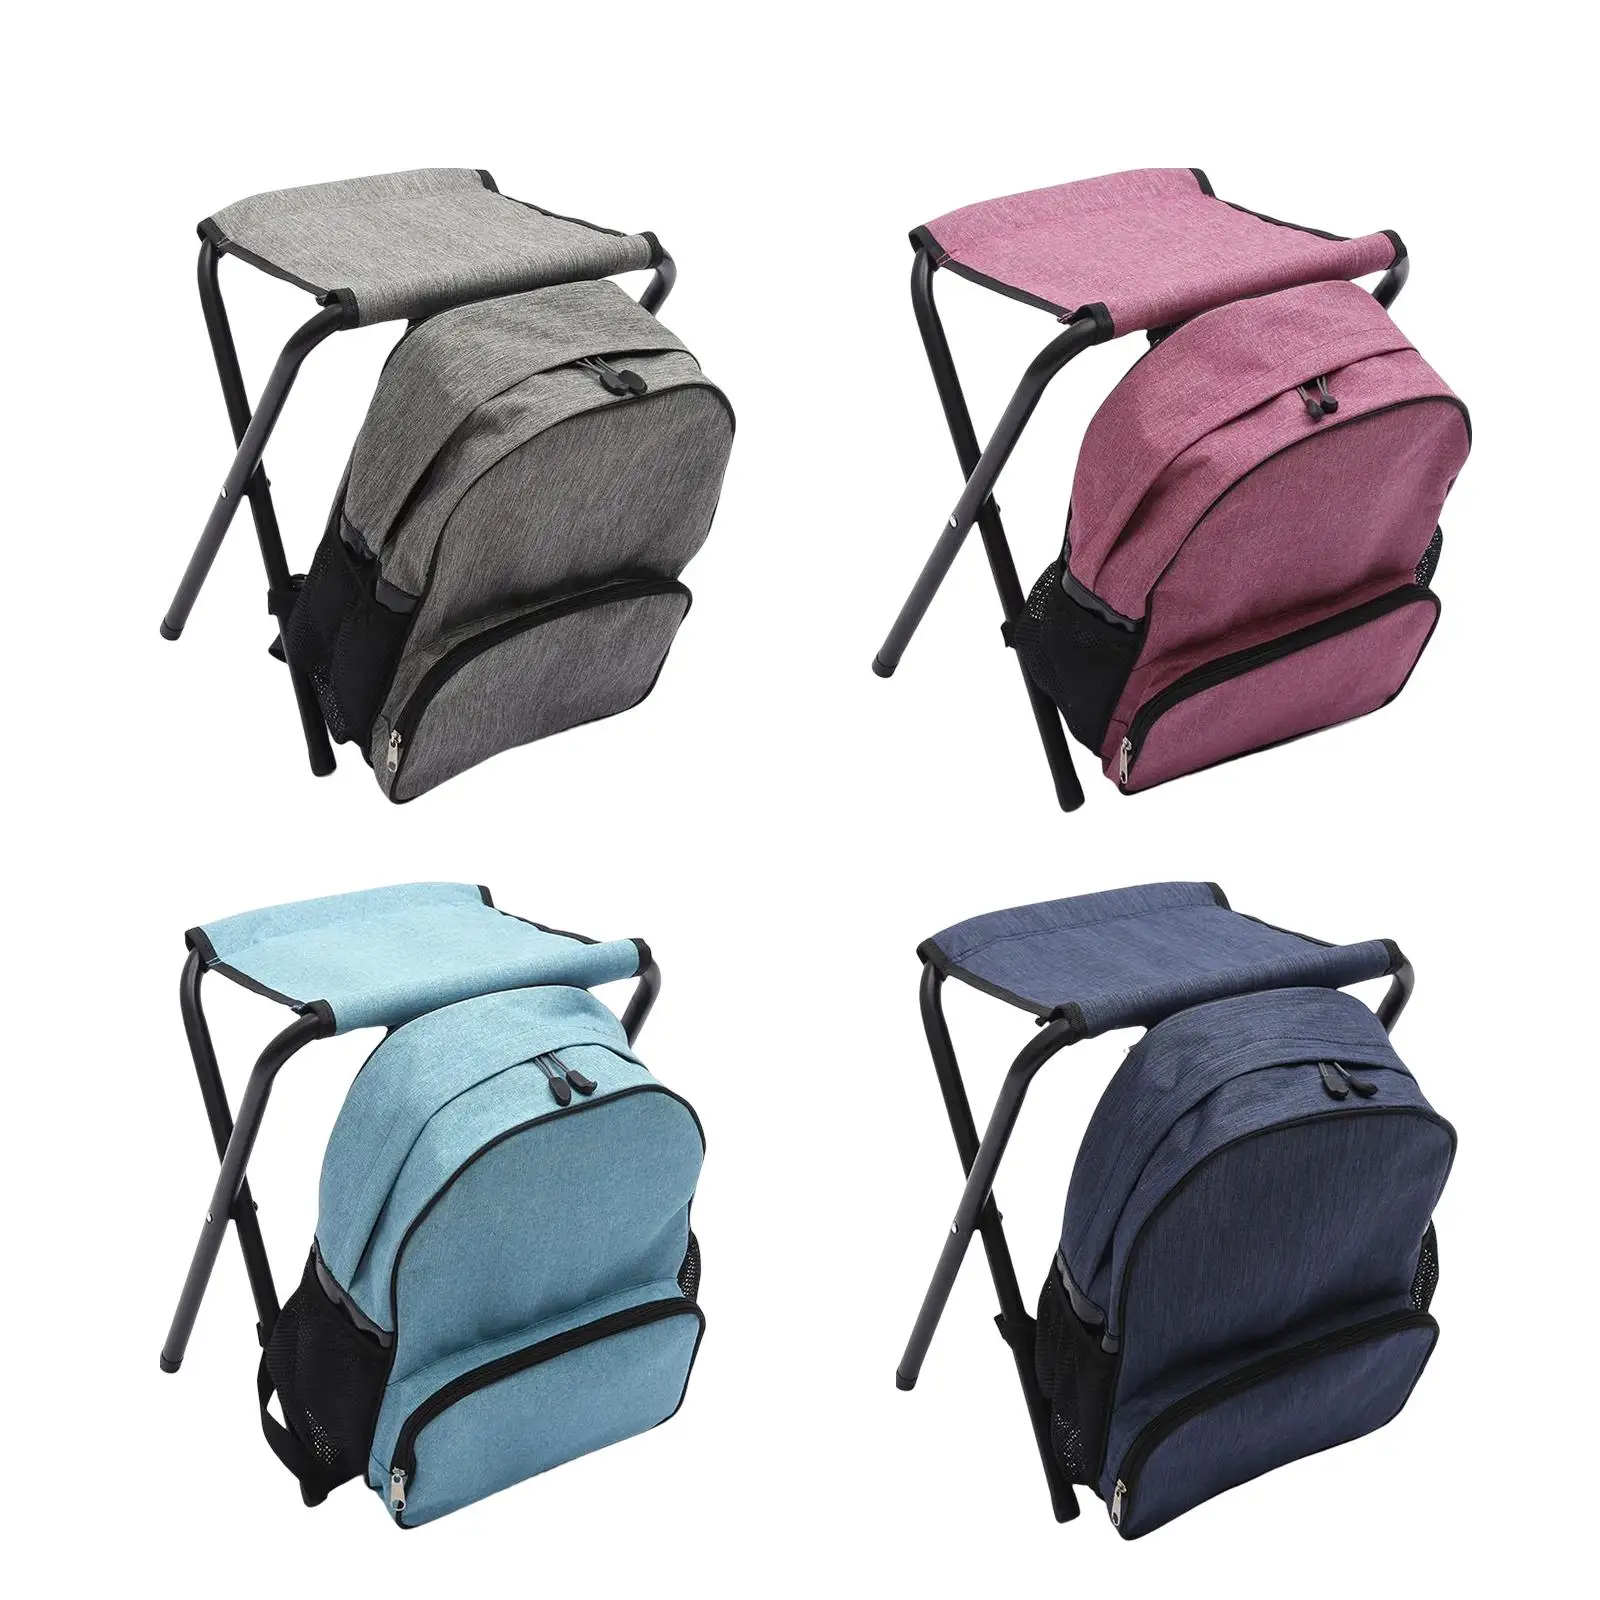 Fishing Seat Lightweight Chair Camp Stool Seat Multifunction Folding Stool with Bag for Fishing Picnic Beach Gardening Outdoor